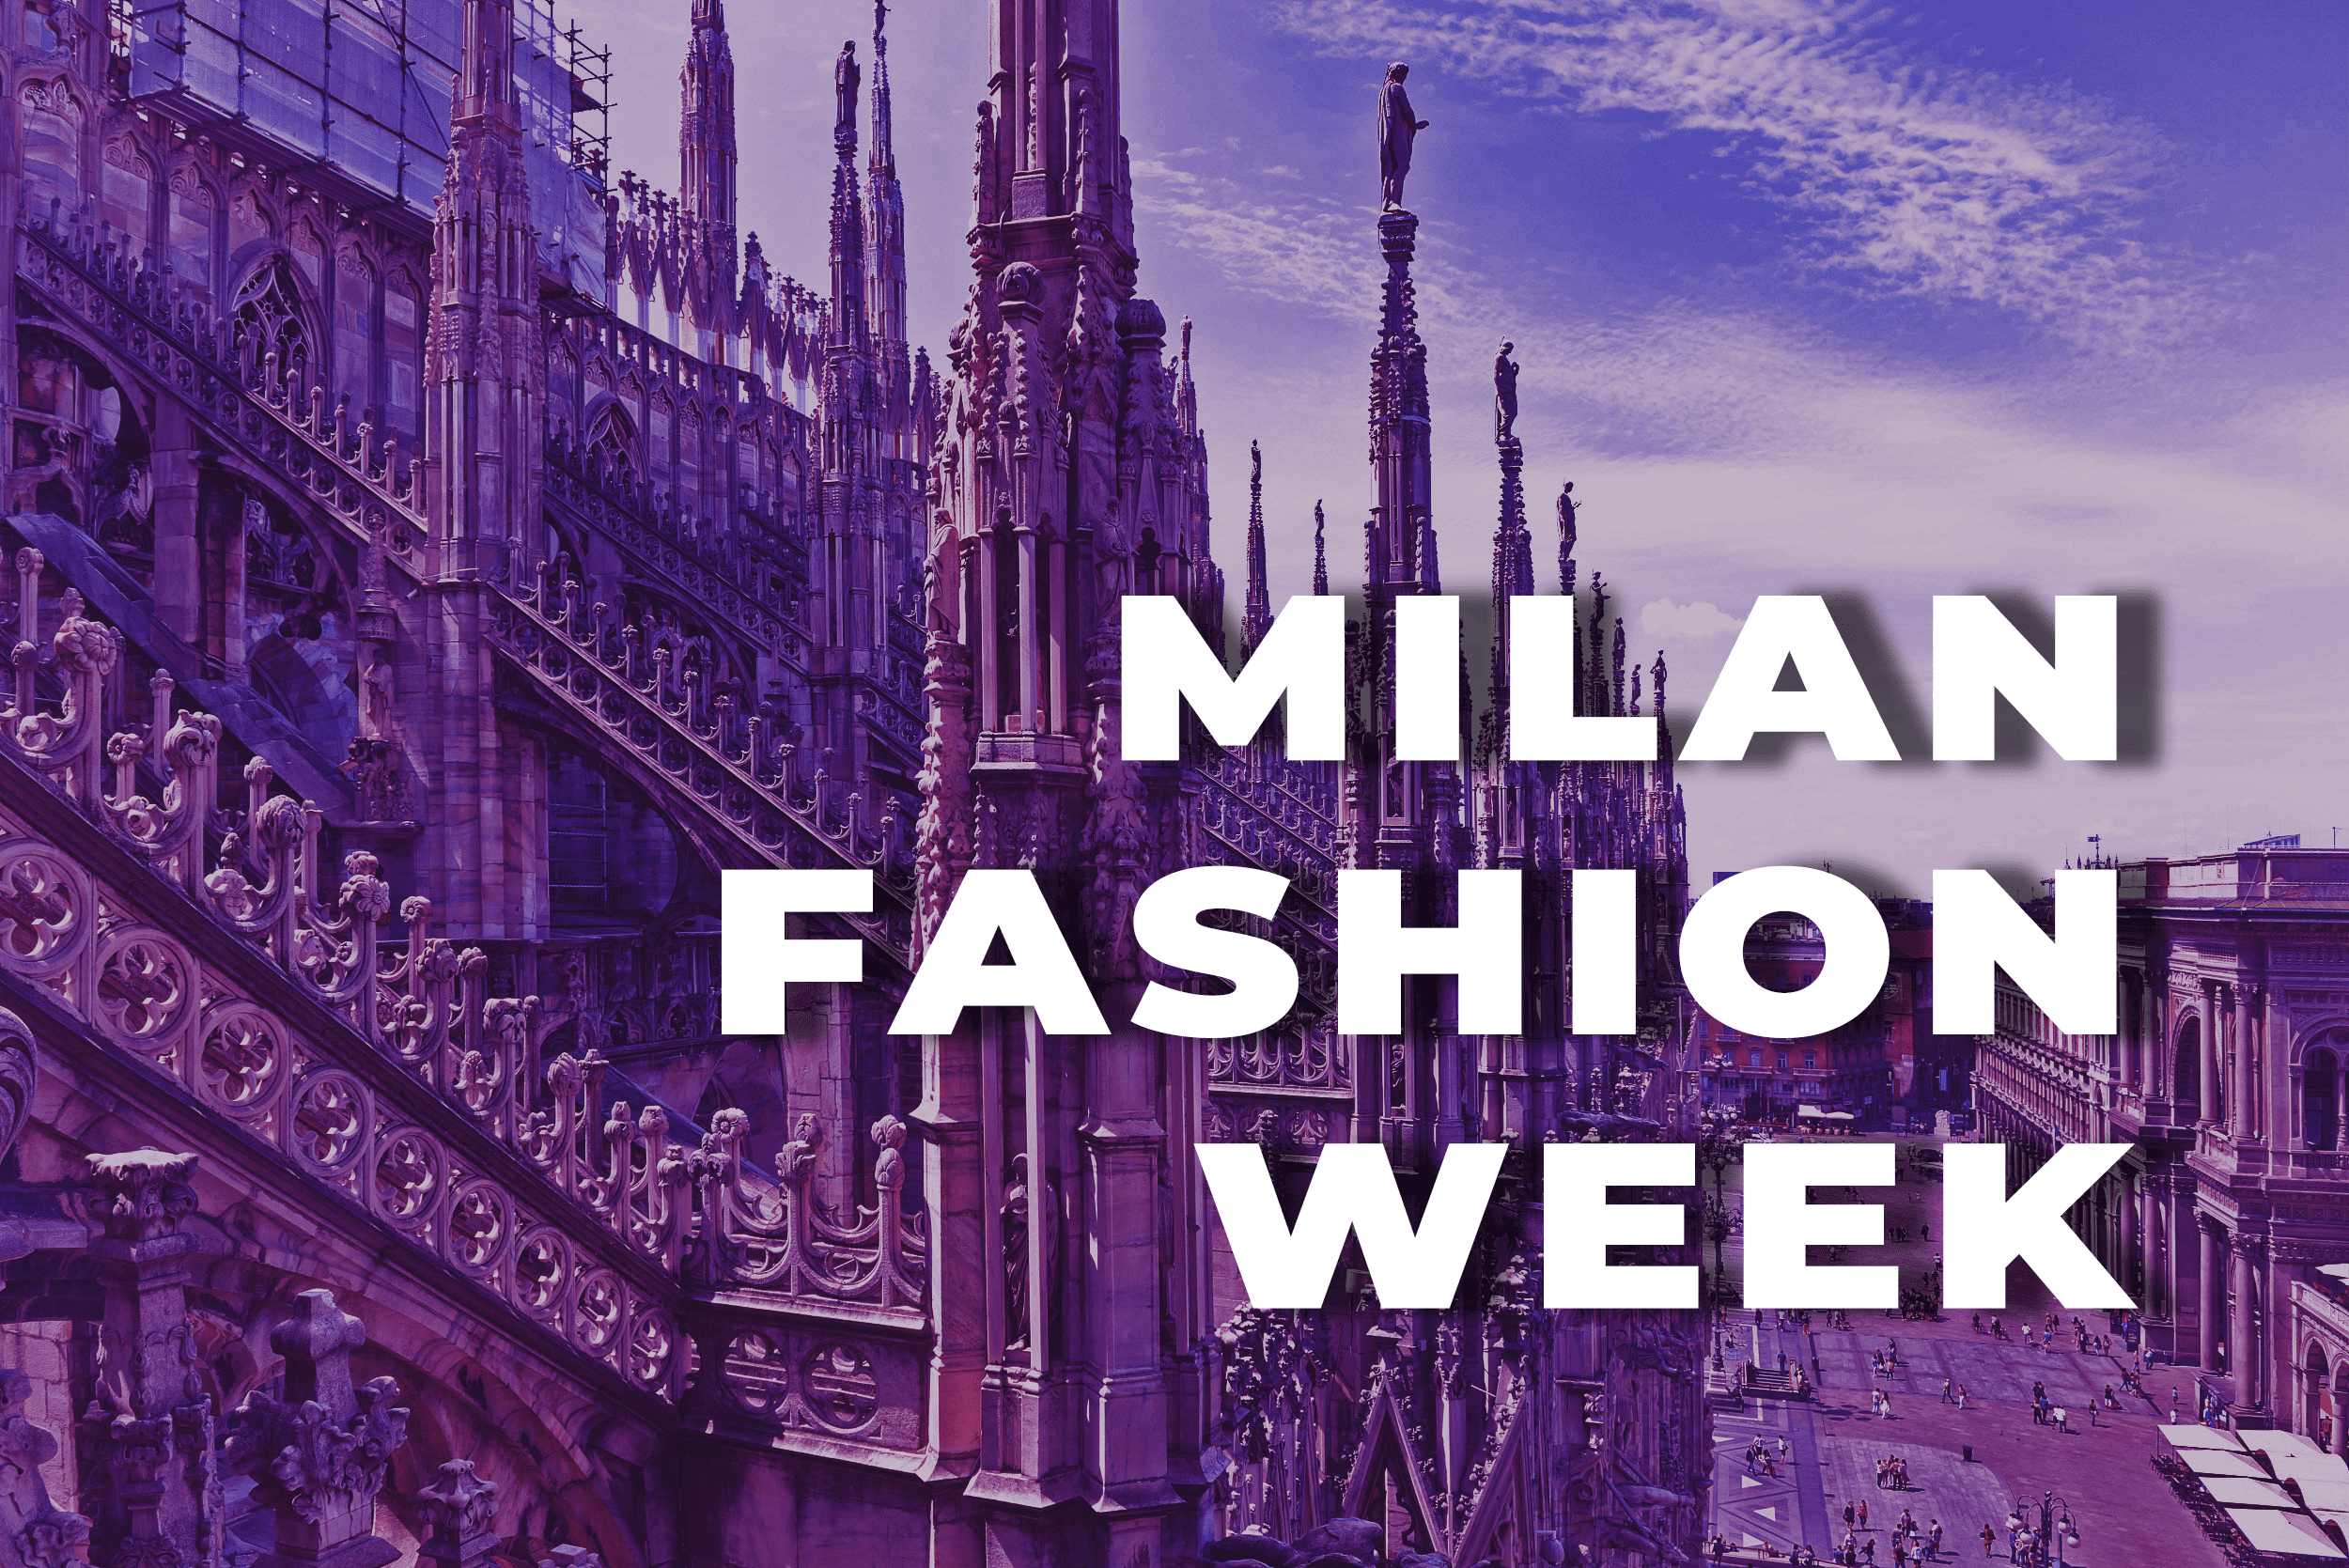 Milan Fashion Week 2022 2023. Dates and Schedule. Everything You Need to Know About Digital